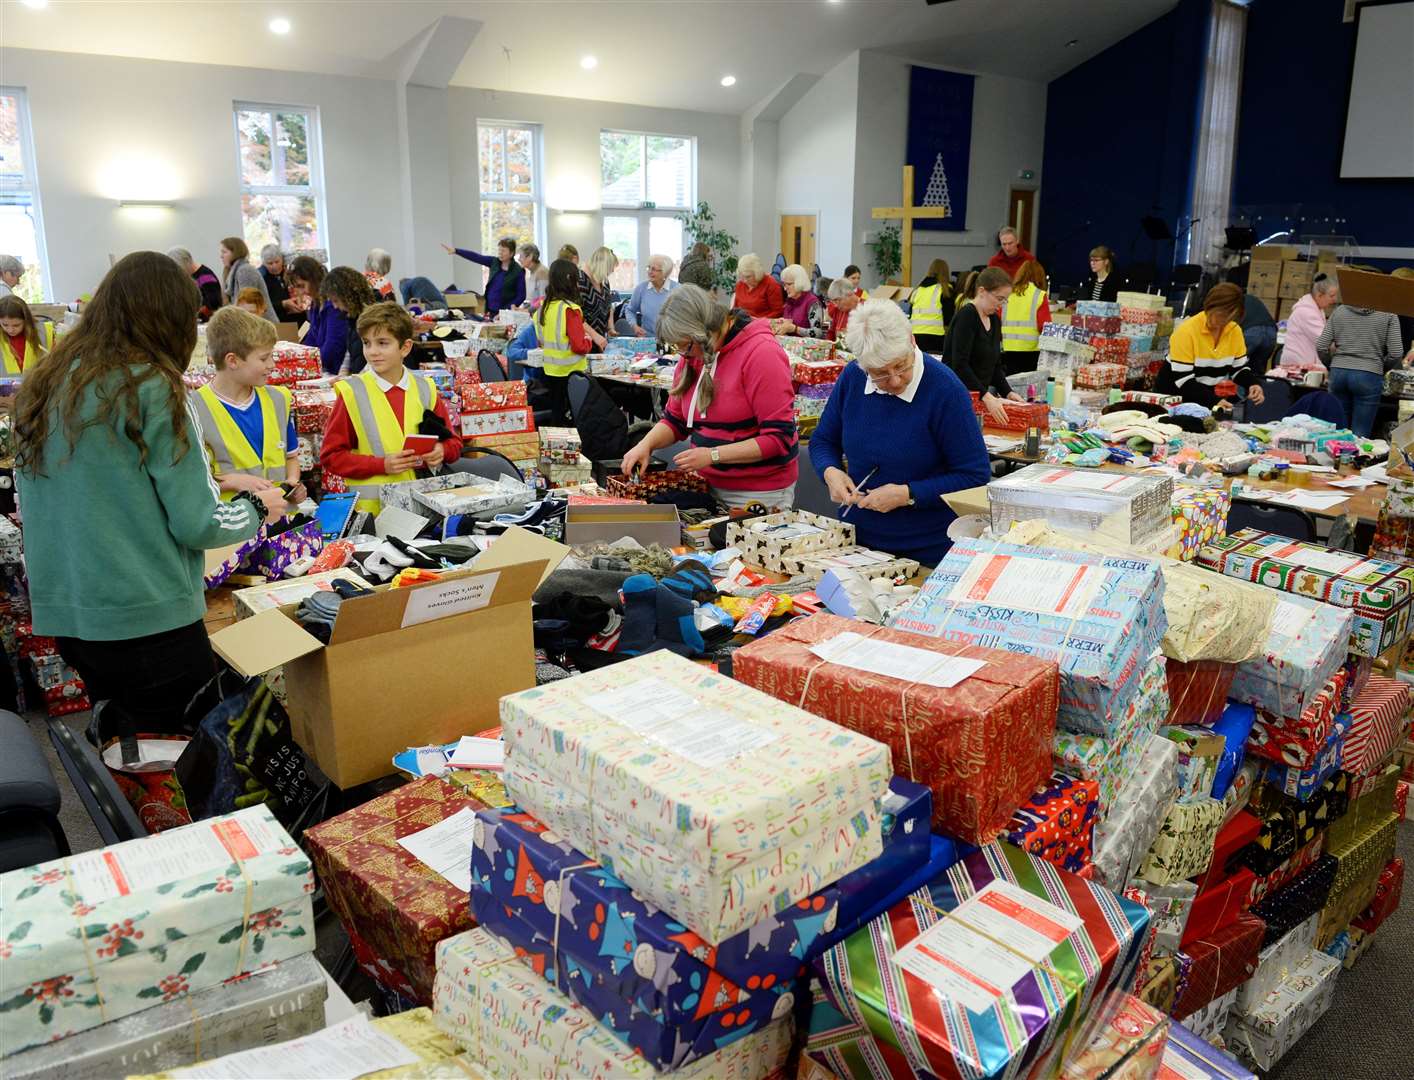 Volunteers putting together boxes of goods for the needy is a sign of practical love at Christmas. Picture: Gary Anthony.